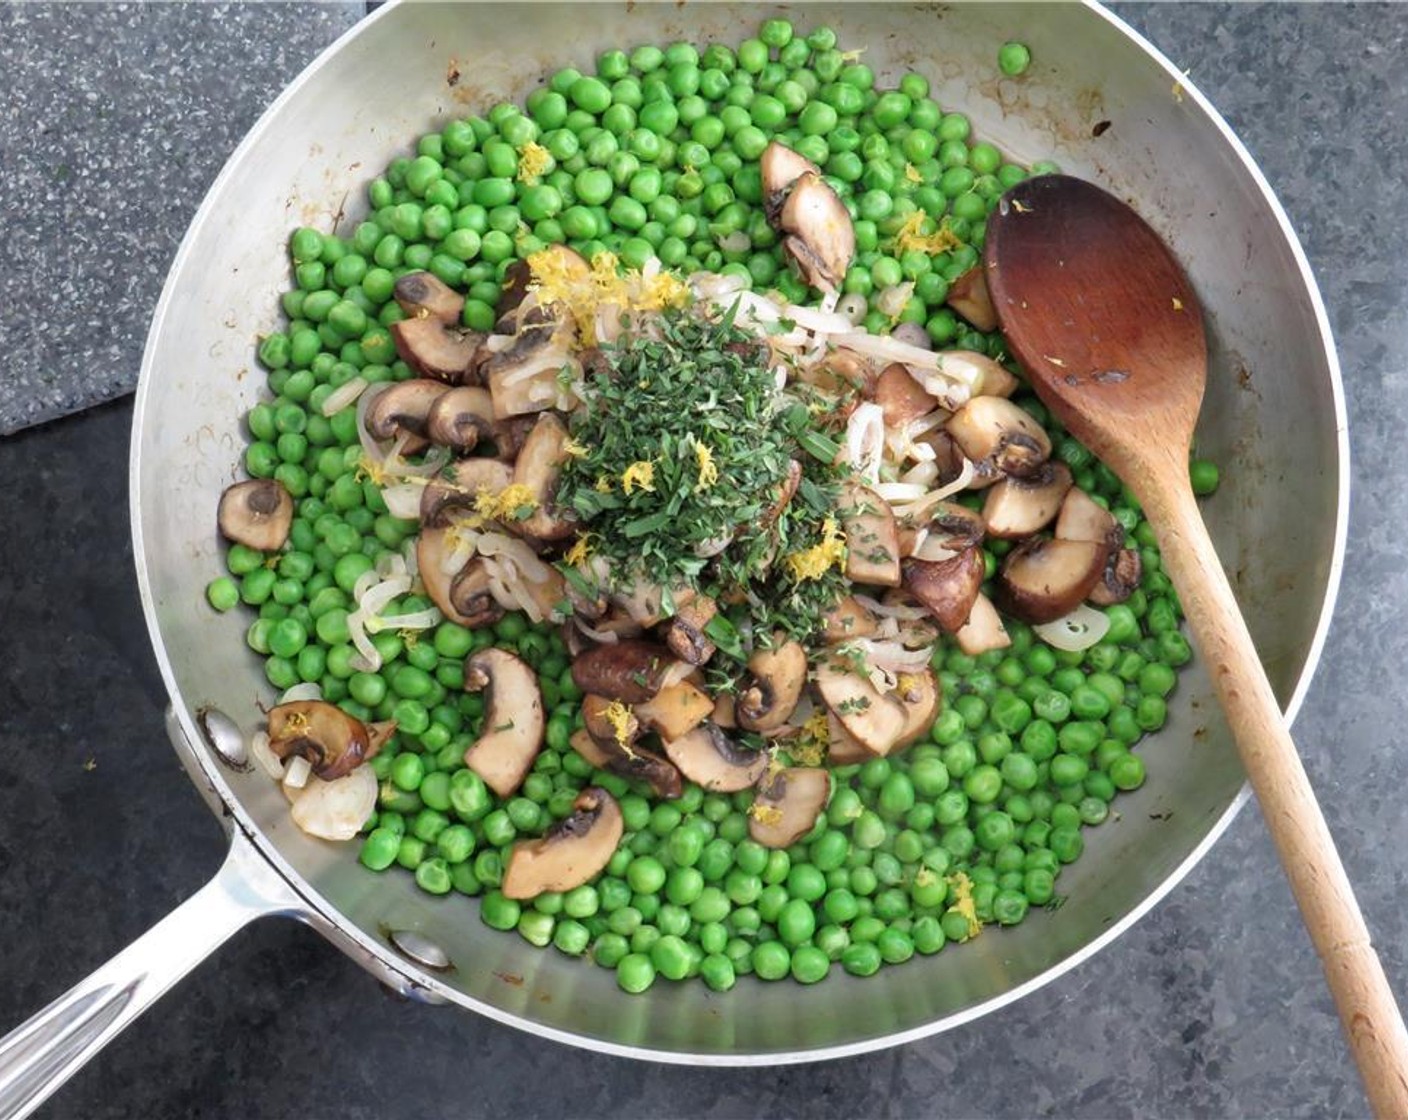 step 4 Return pan to heat. Add Frozen Green Peas (3 2/3 cups) and Vegetable Broth (1/4 cup) Heat over medium high heat, until broth boils and peas are heated through. Remove peas from heat, and stir in shallots and mushrooms to combine.